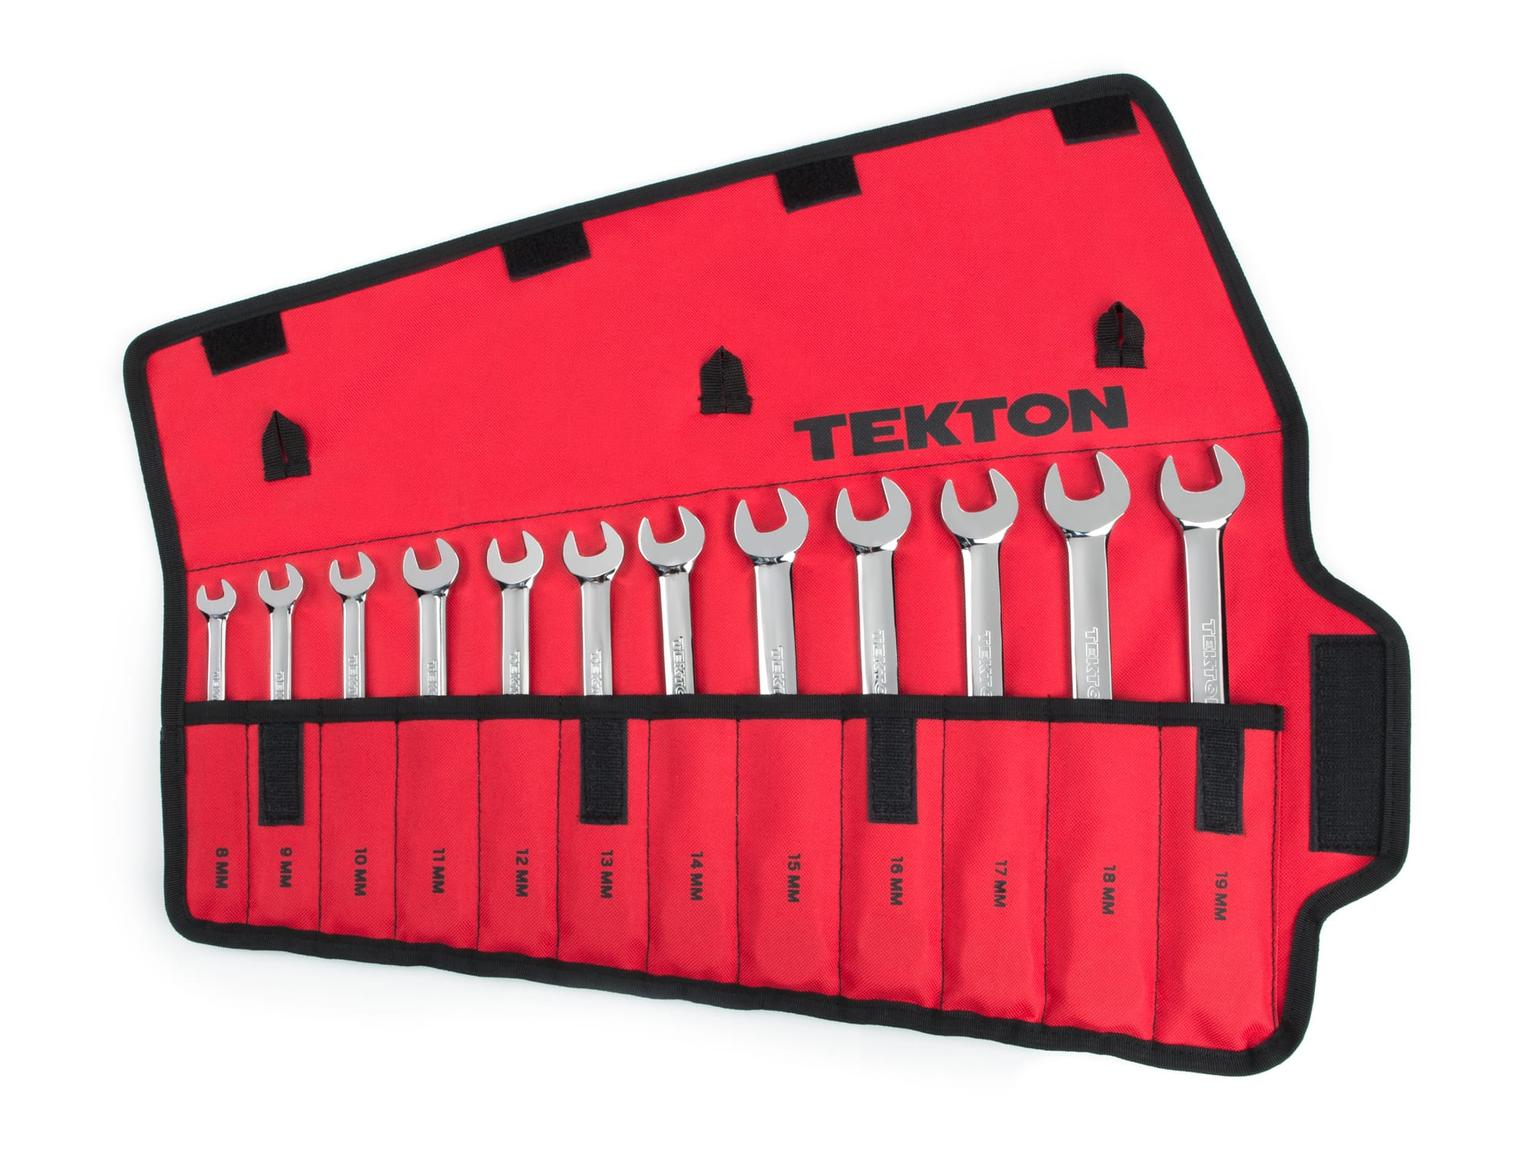 TEKTON WRN57190-T Flex Ratcheting Combination Wrench Set with Pouch, 12-Piece (8-19 mm)